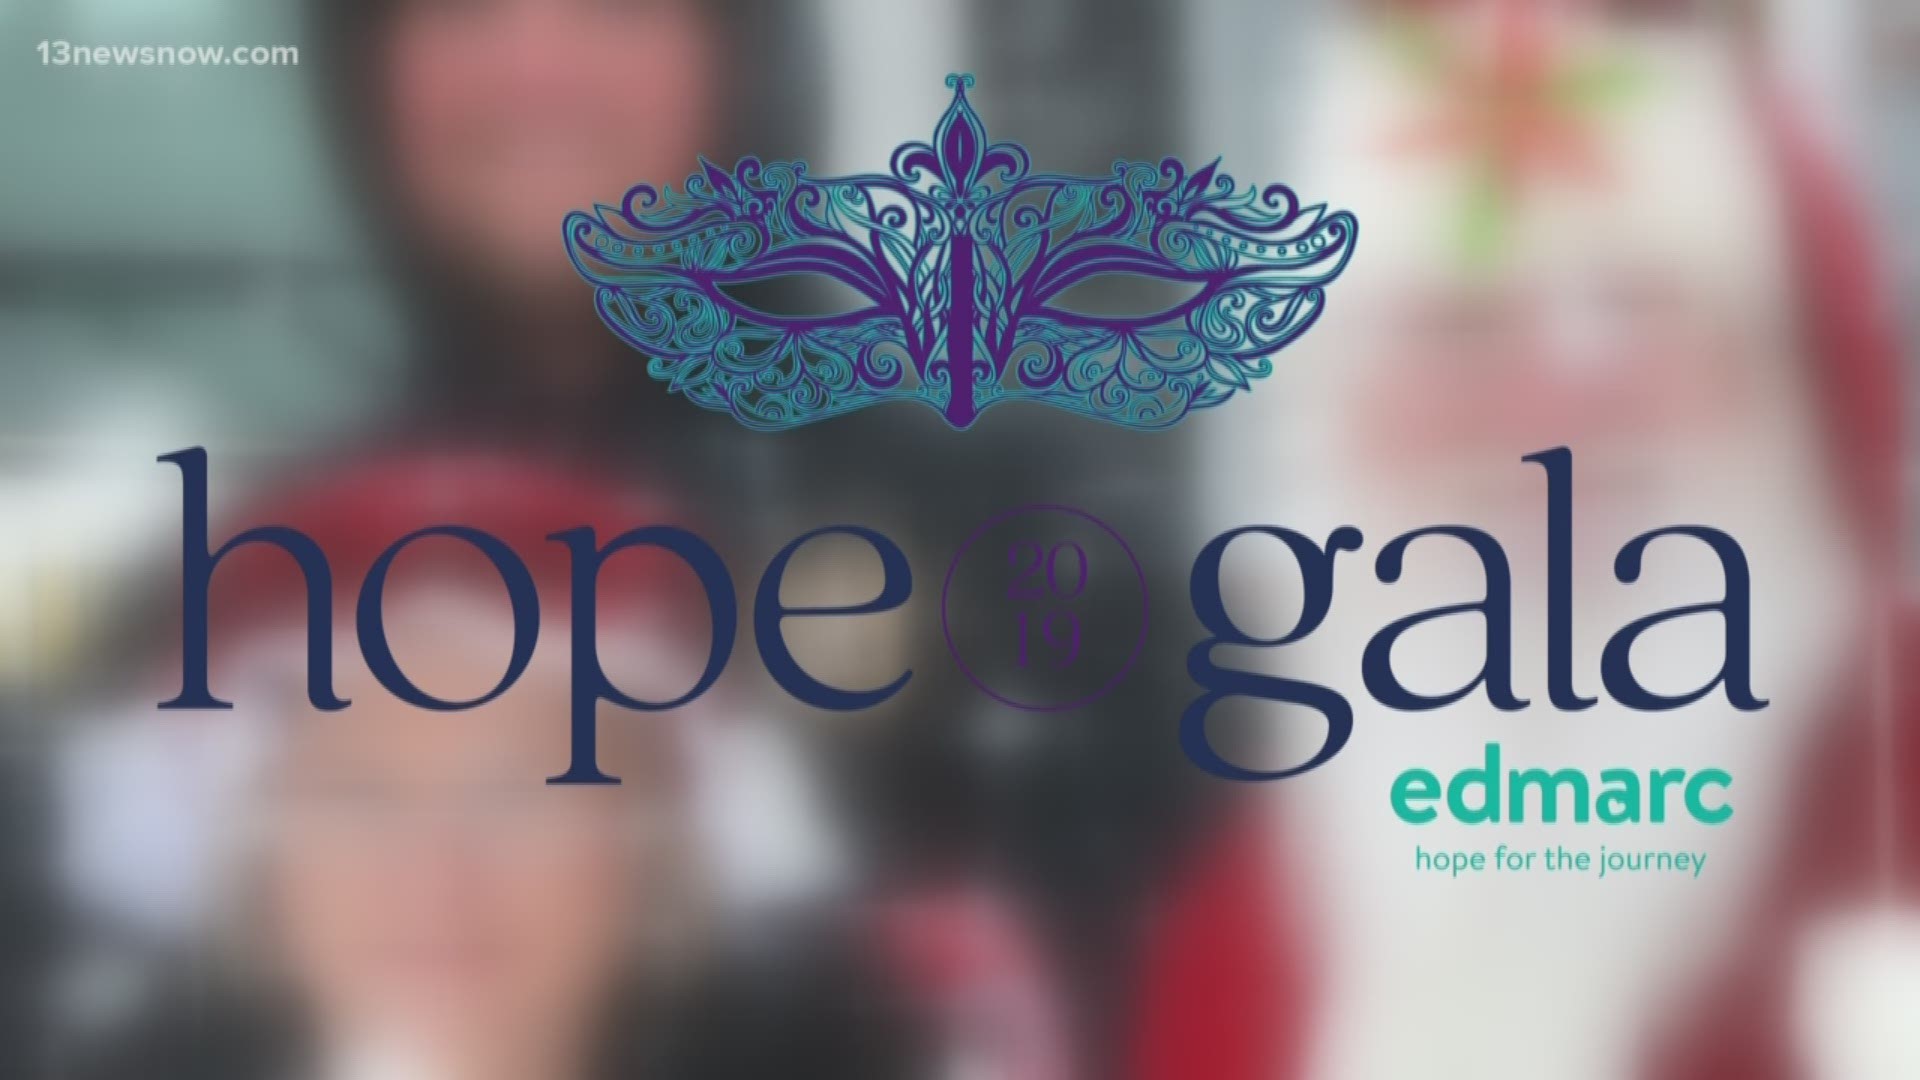 Edmarc helps children with serious illnesses stay at home with their families. It will be hosting its 7th annual Hope Gala at the Virginia Beach Oceanfront.